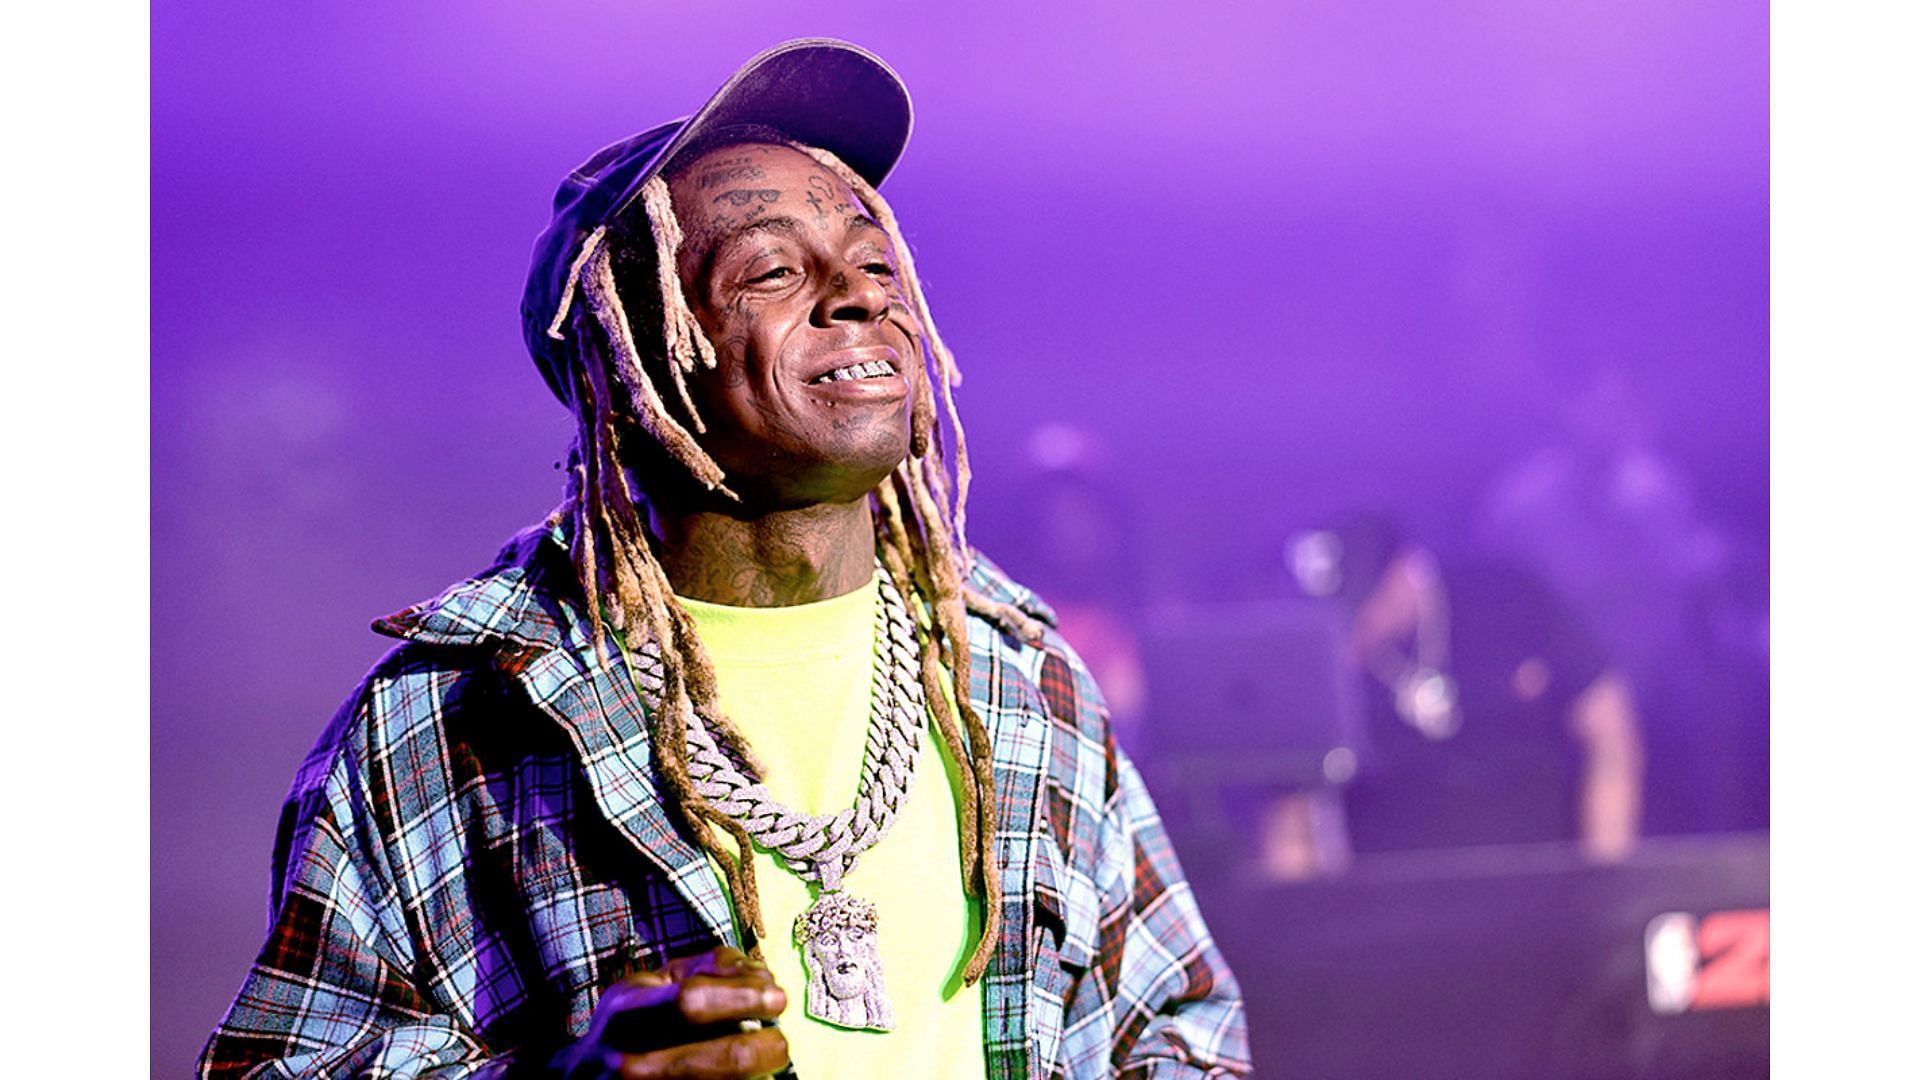 Weezy photographed by Greg Doherty (Image via Getty Images)